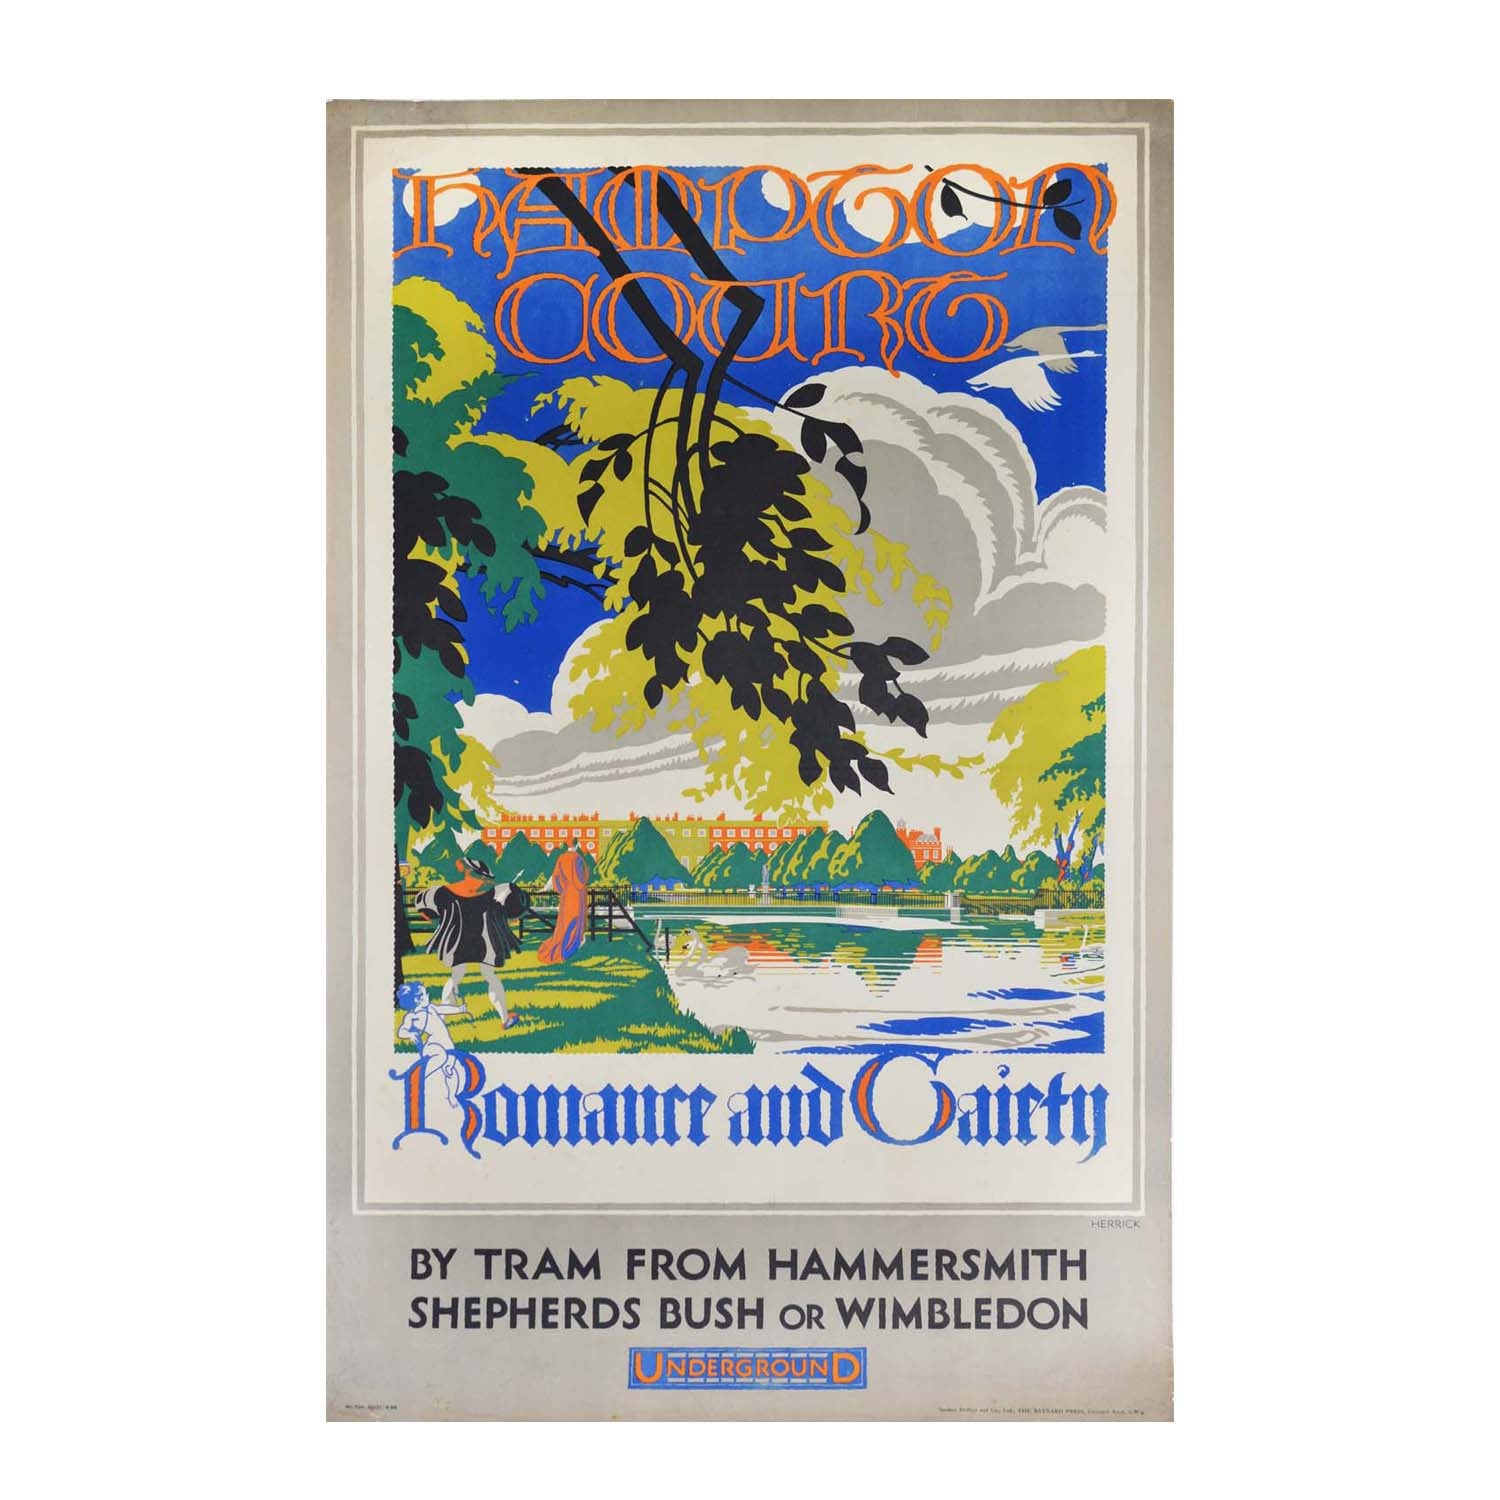 Original London Underground poster: Hampton Court by Charles Herrick, depicting a green countryside with the text 'Romance and Gaiety underneath. 